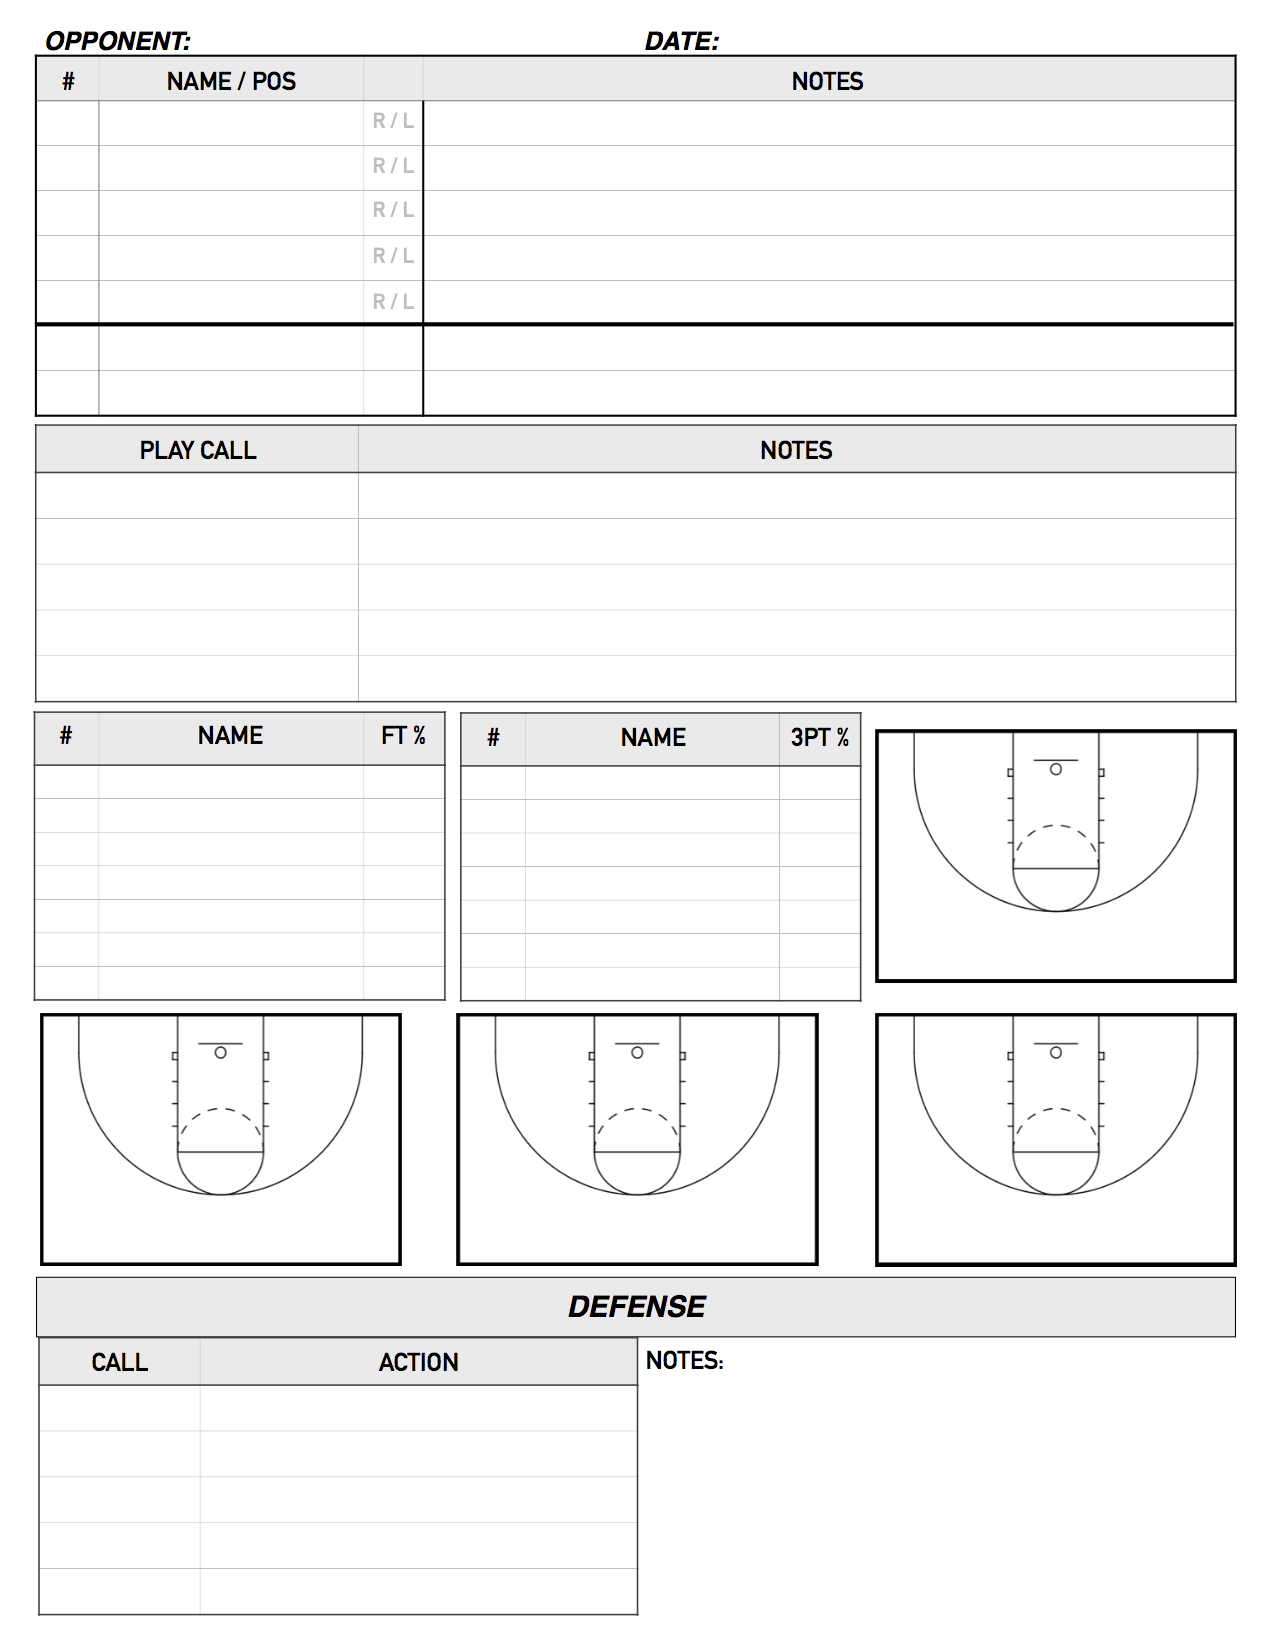 Scouting From The Bench | College Basketball, Basketball Pertaining To Scouting Report Basketball Template